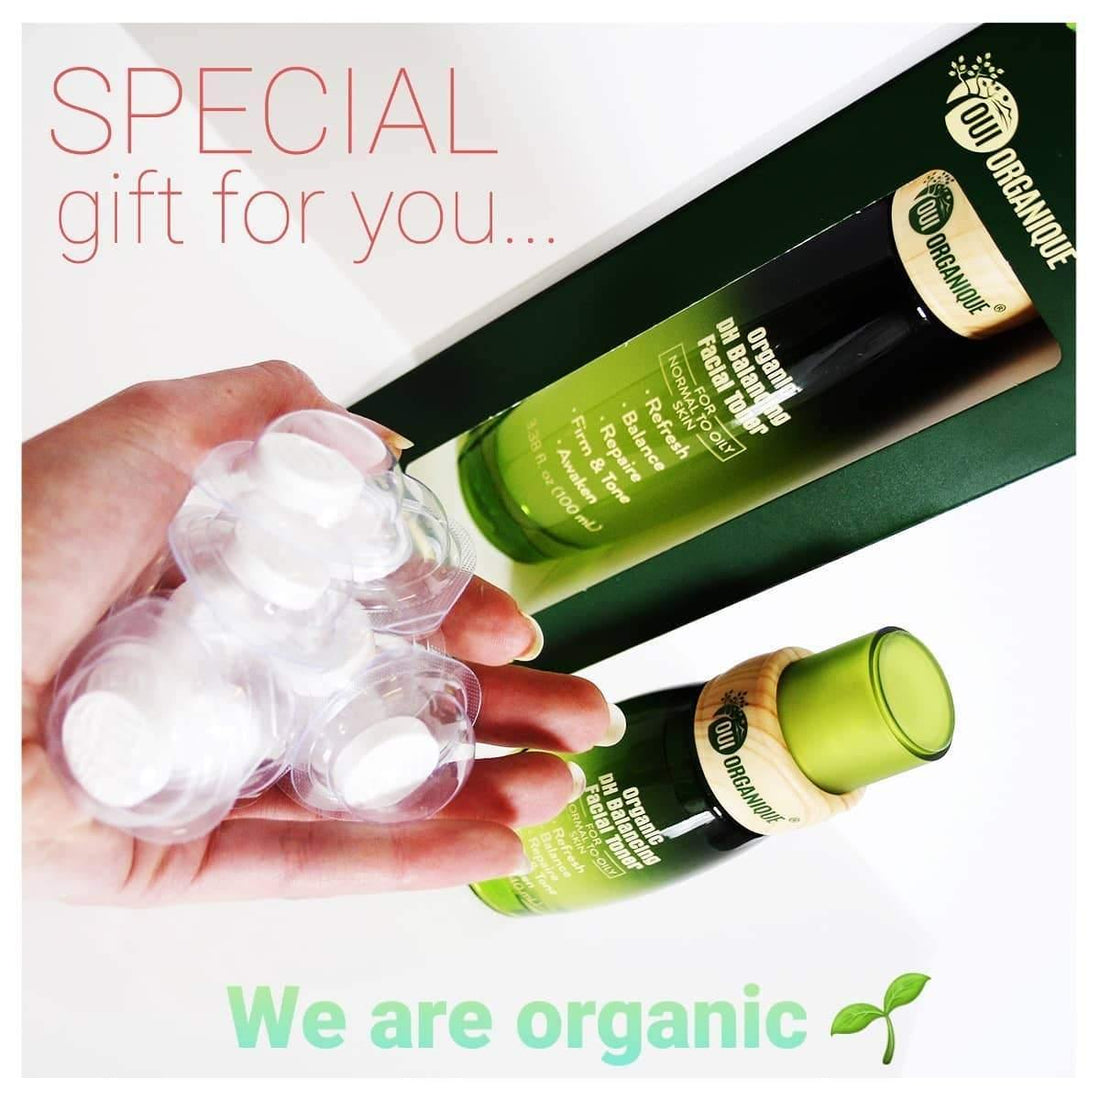 Your gift is waiting for... - OUI ORGANIQUE